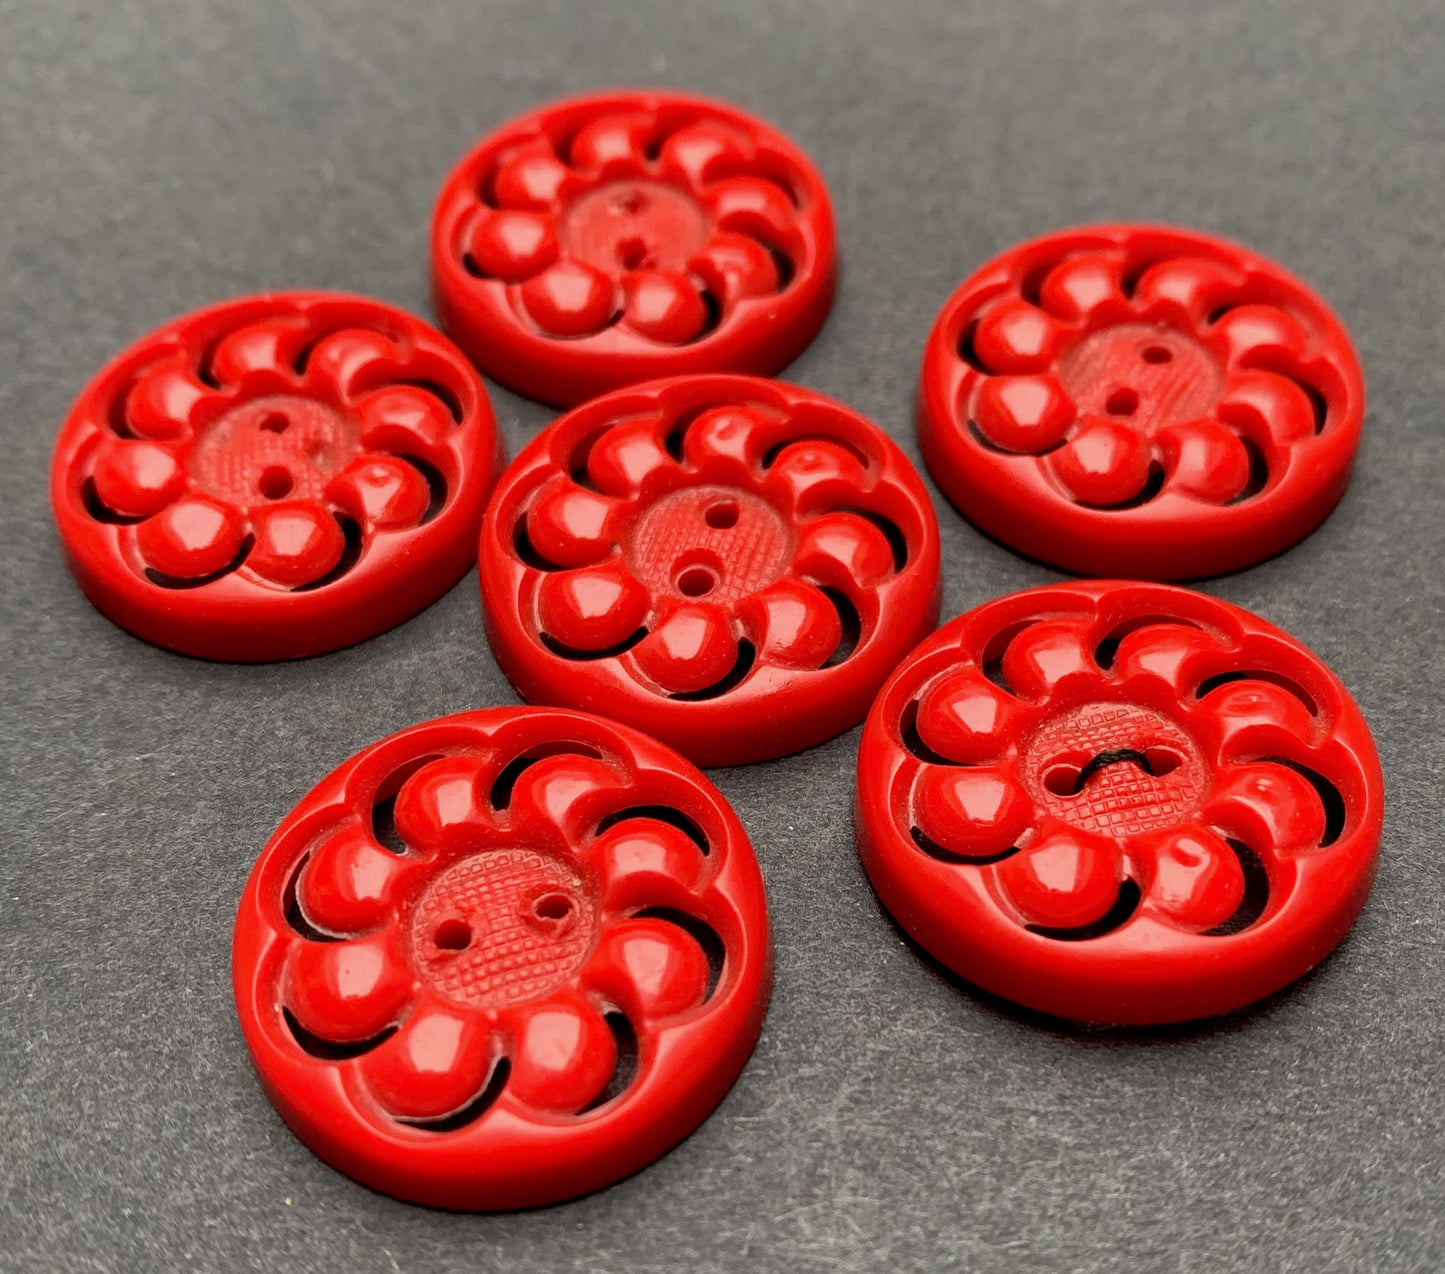 Bright Red Vintage French 2.3cm, 1.8cm & 1.3cm Swirl Buttons - Lots of 6, 12 or 24